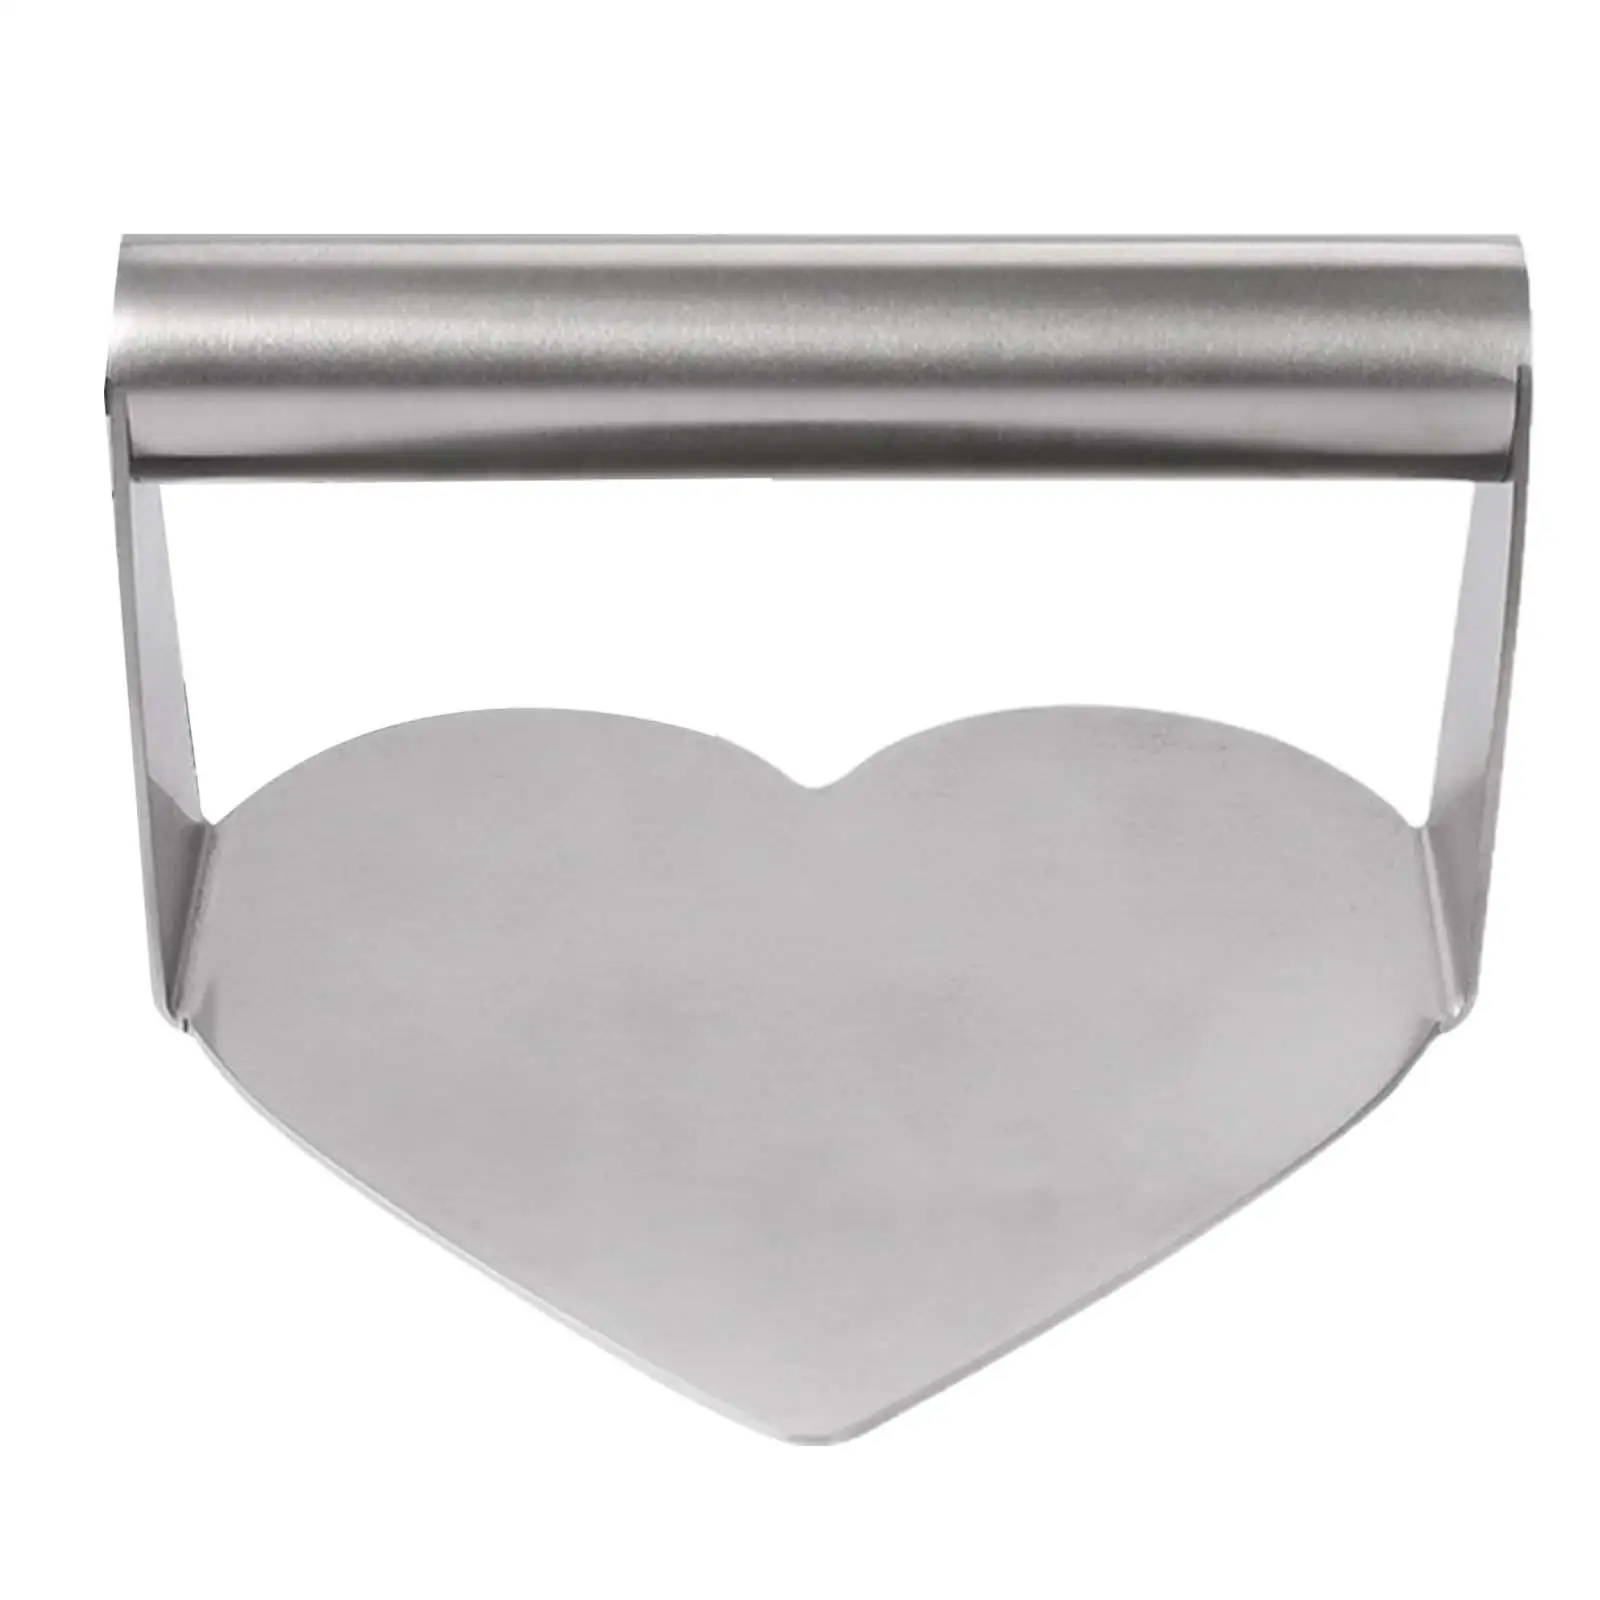 Grill Press with Handle Heart Shaped Heavy Duty Burger Press for Professional and Home Cooking Tortilla Flattops Griddle Grills